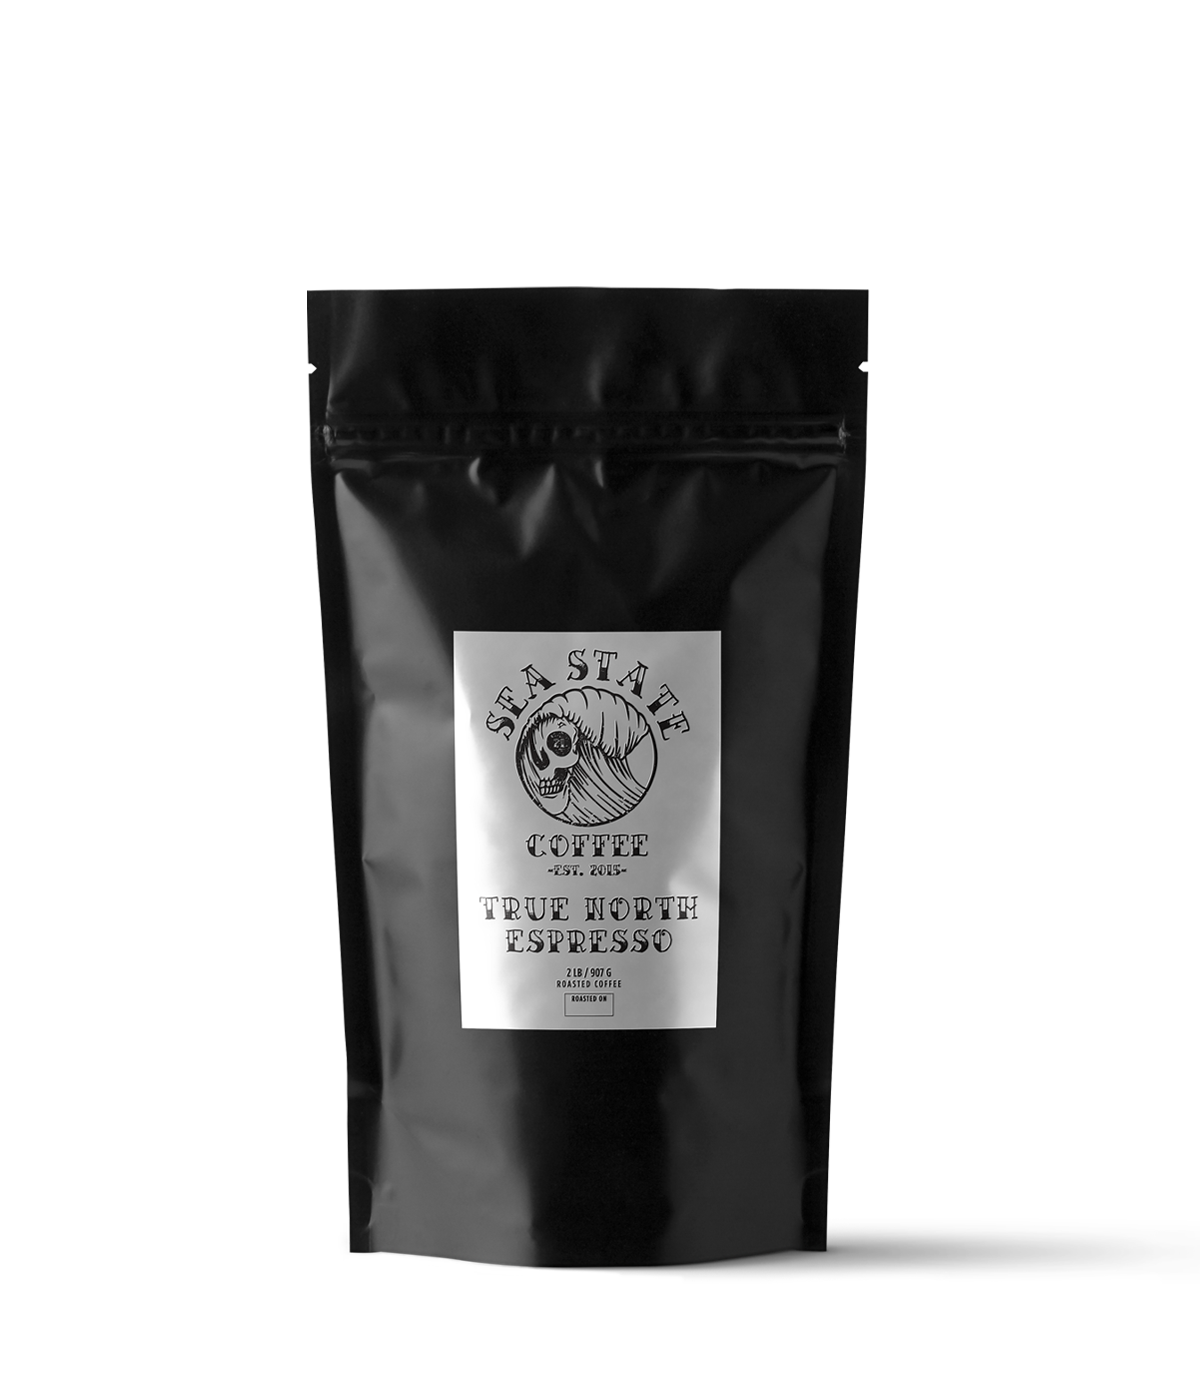 2 lb Colombian Santa Barbara Excelso 15/16 Espresso, Dark Roasted Coffee  Beans